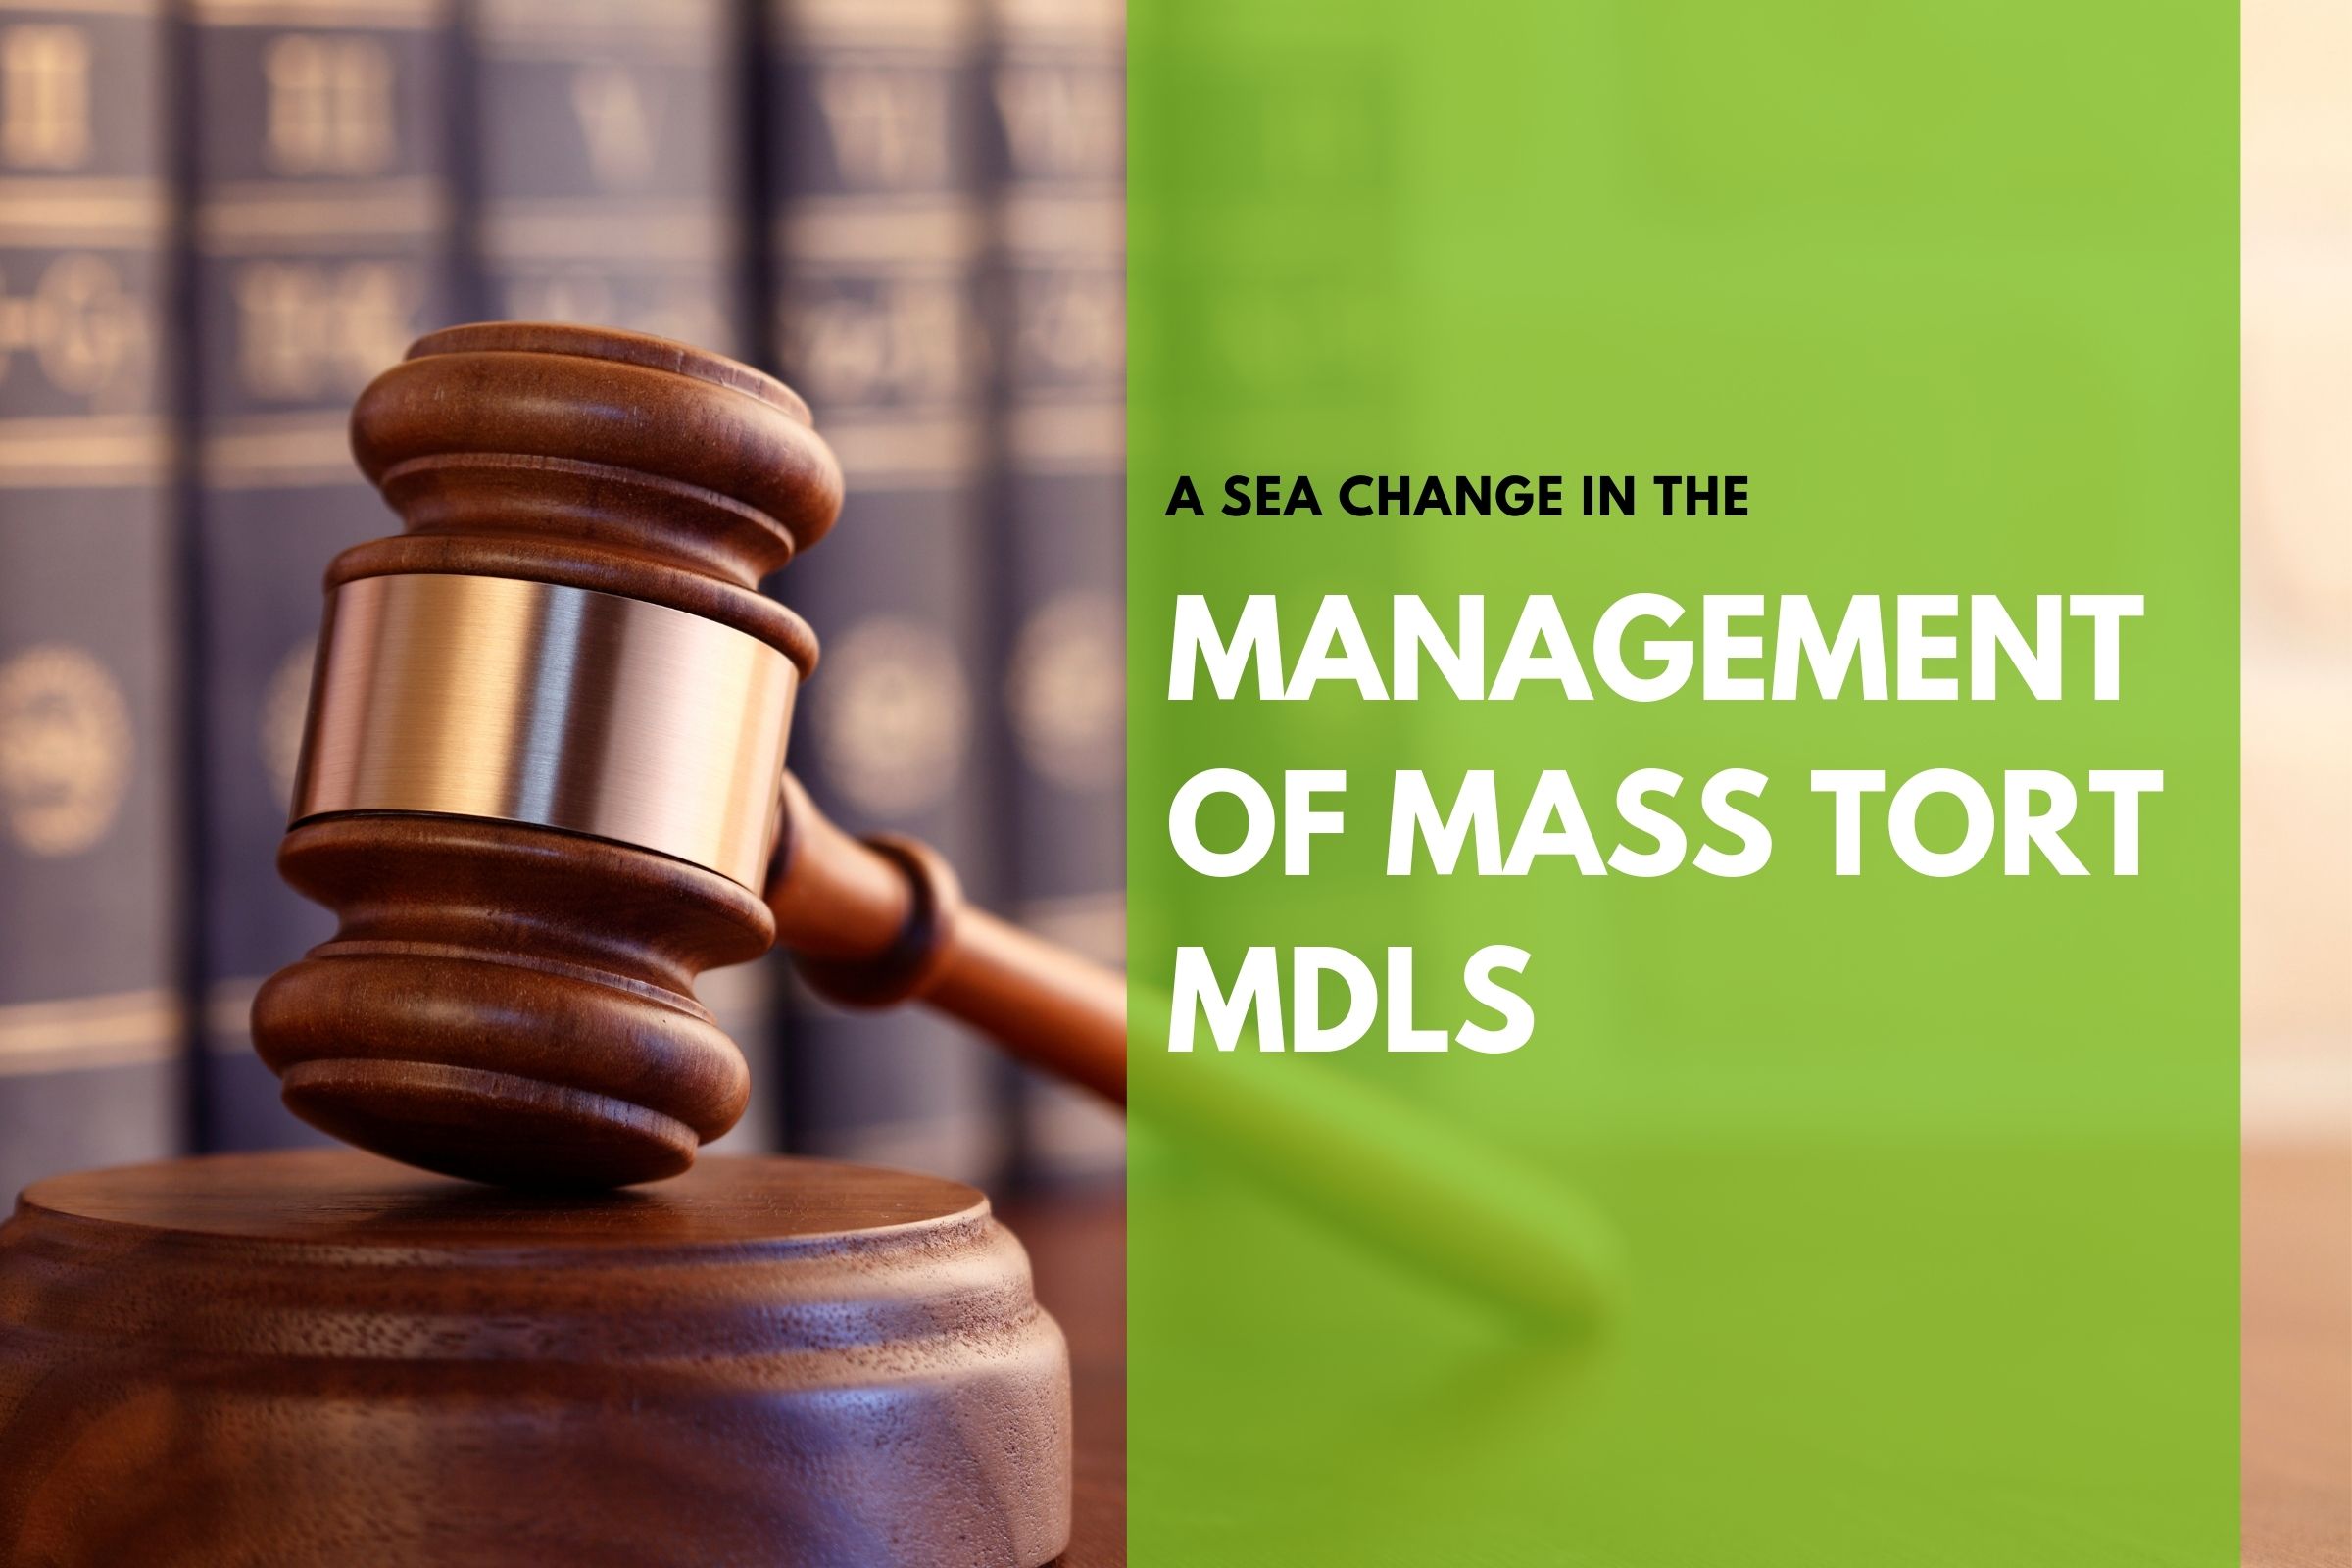 A Sea Change in the Management of Mass Tort MDLs